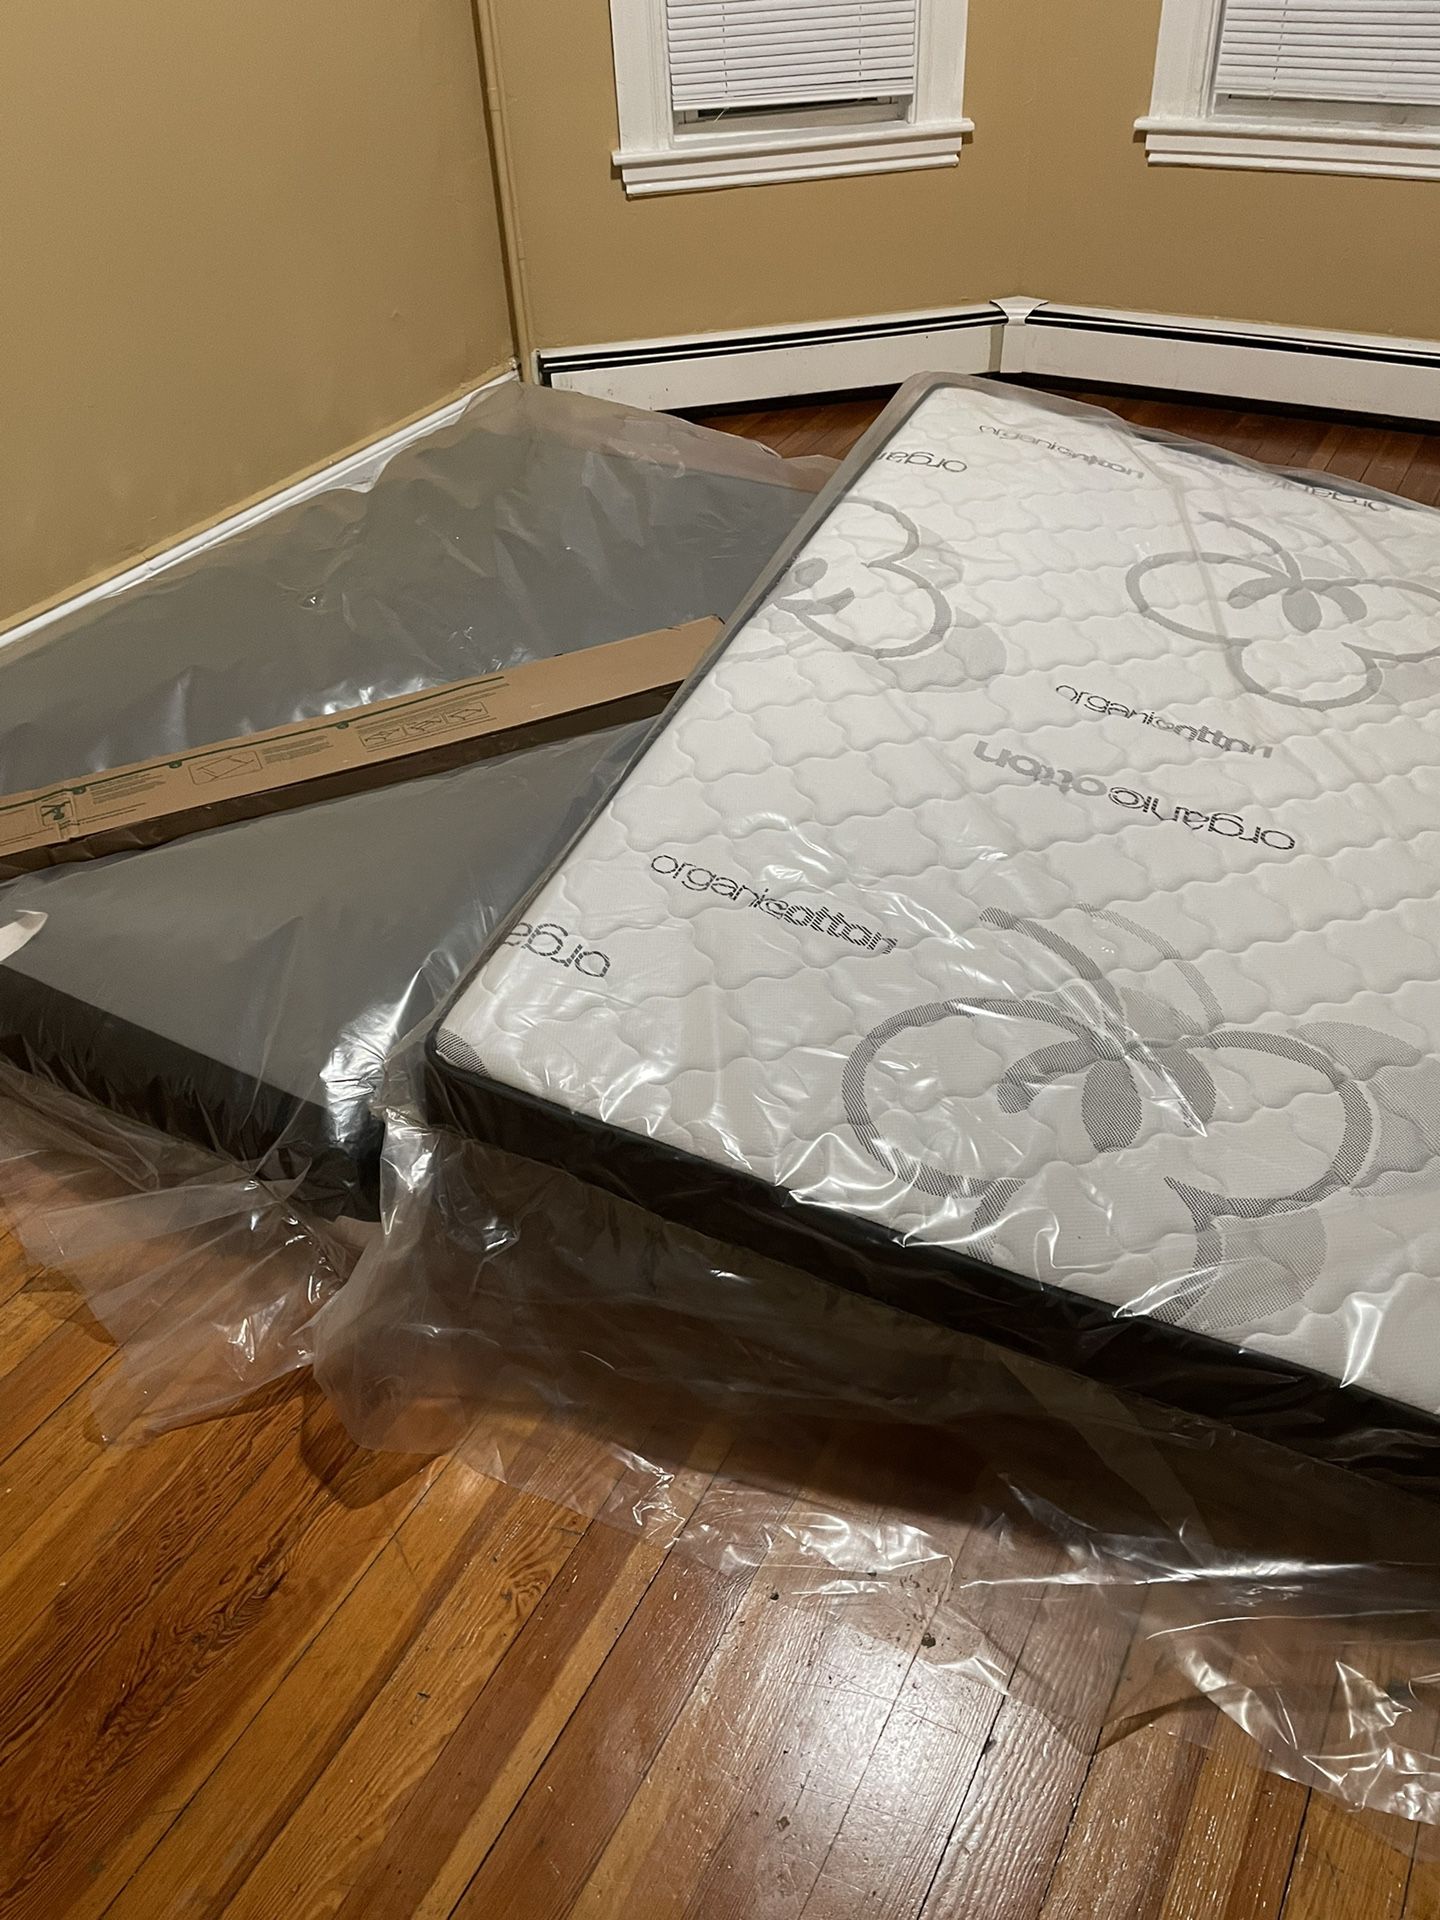 Full Mattress With Box springs And Bed Frame New 